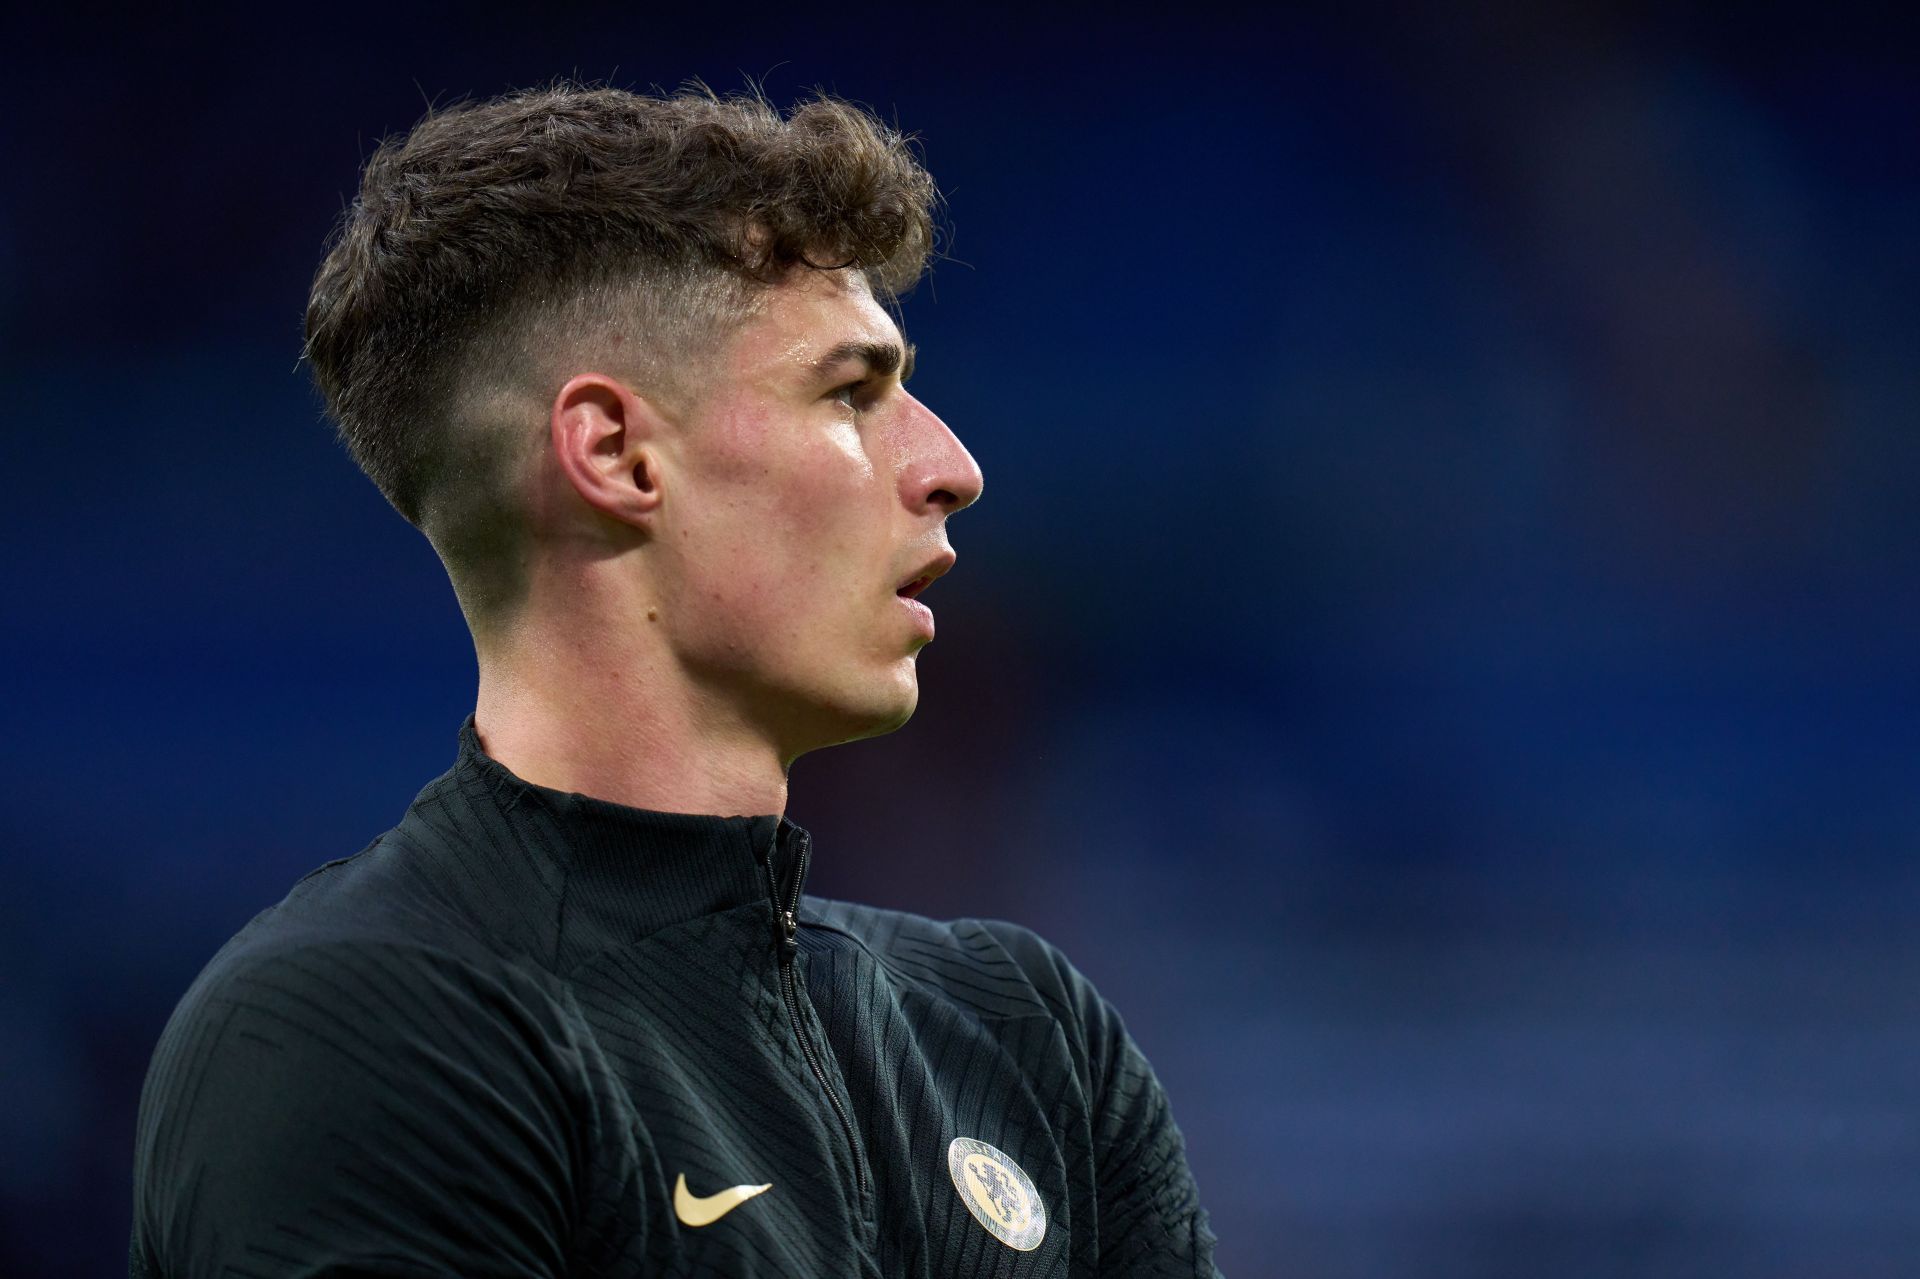 Kepa hopes to convince Madrid to sign him permanently.